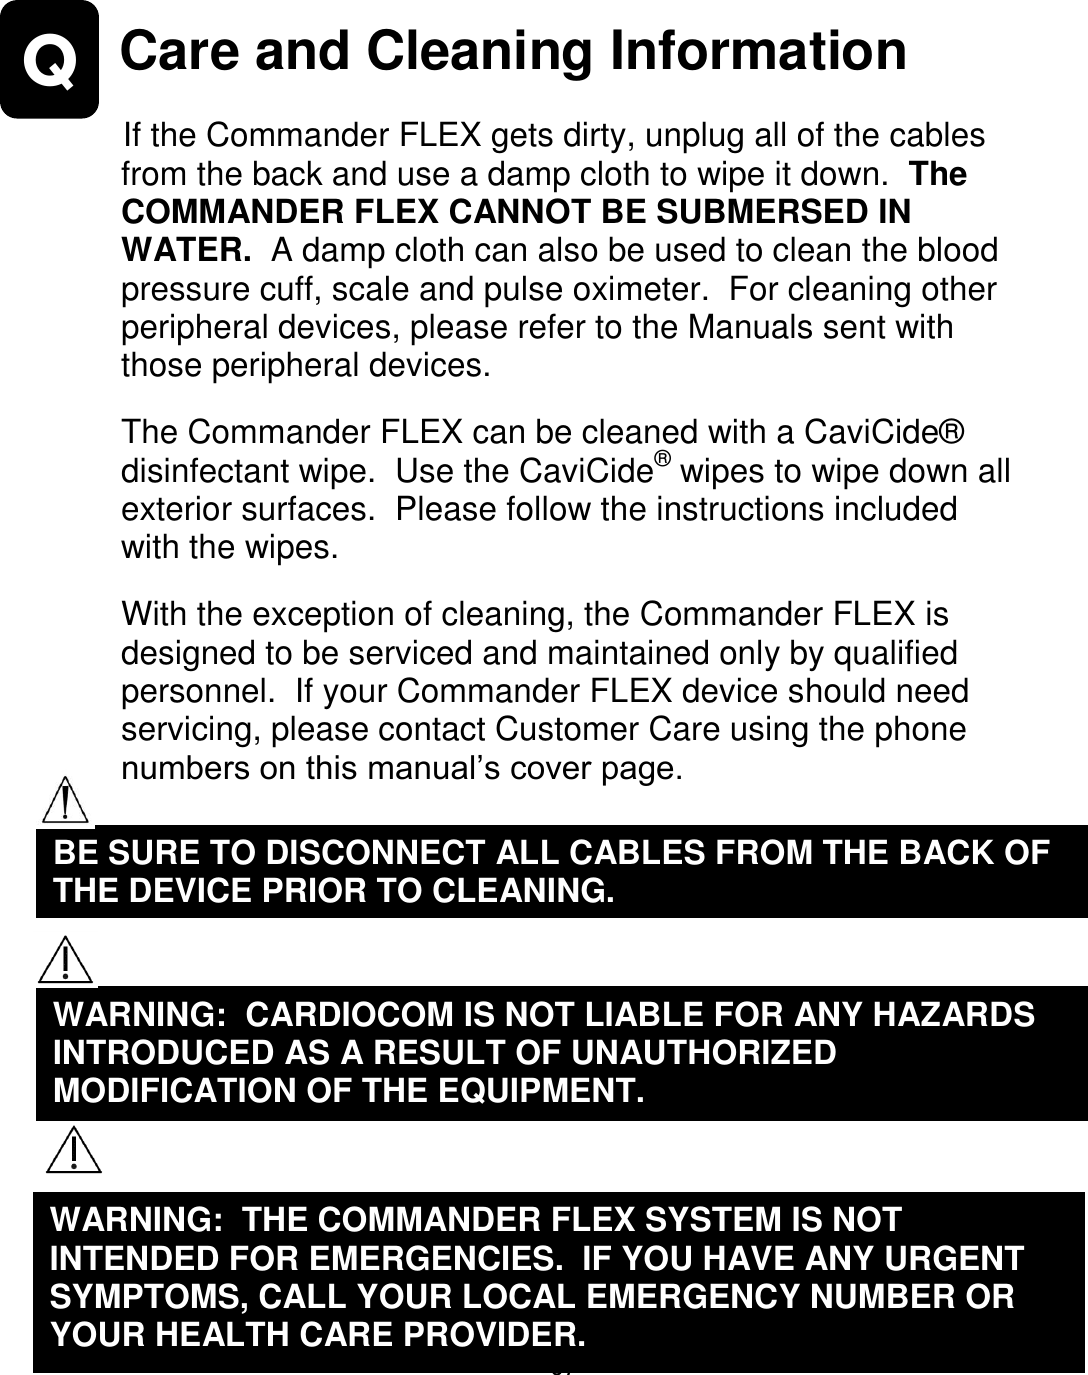                      67 Q   Care and Cleaning Information  If the Commander FLEX gets dirty, unplug all of the cables from the back and use a damp cloth to wipe it down.  The COMMANDER FLEX CANNOT BE SUBMERSED IN WATER.  A damp cloth can also be used to clean the blood pressure cuff, scale and pulse oximeter.  For cleaning other peripheral devices, please refer to the Manuals sent with those peripheral devices.  The Commander FLEX can be cleaned with a CaviCide® disinfectant wipe.  Use the CaviCide® wipes to wipe down all exterior surfaces.  Please follow the instructions included with the wipes.  With the exception of cleaning, the Commander FLEX is designed to be serviced and maintained only by qualified personnel.  If your Commander FLEX device should need servicing, please contact Customer Care using the phone numbers on this manual’s cover page.              WARNING:  CARDIOCOM IS NOT LIABLE FOR ANY HAZARDS INTRODUCED AS A RESULT OF UNAUTHORIZED MODIFICATION OF THE EQUIPMENT.  WARNING:  THE COMMANDER FLEX SYSTEM IS NOT INTENDED FOR EMERGENCIES.  IF YOU HAVE ANY URGENT SYMPTOMS, CALL YOUR LOCAL EMERGENCY NUMBER OR YOUR HEALTH CARE PROVIDER.  BE SURE TO DISCONNECT ALL CABLES FROM THE BACK OF THE DEVICE PRIOR TO CLEANING.  